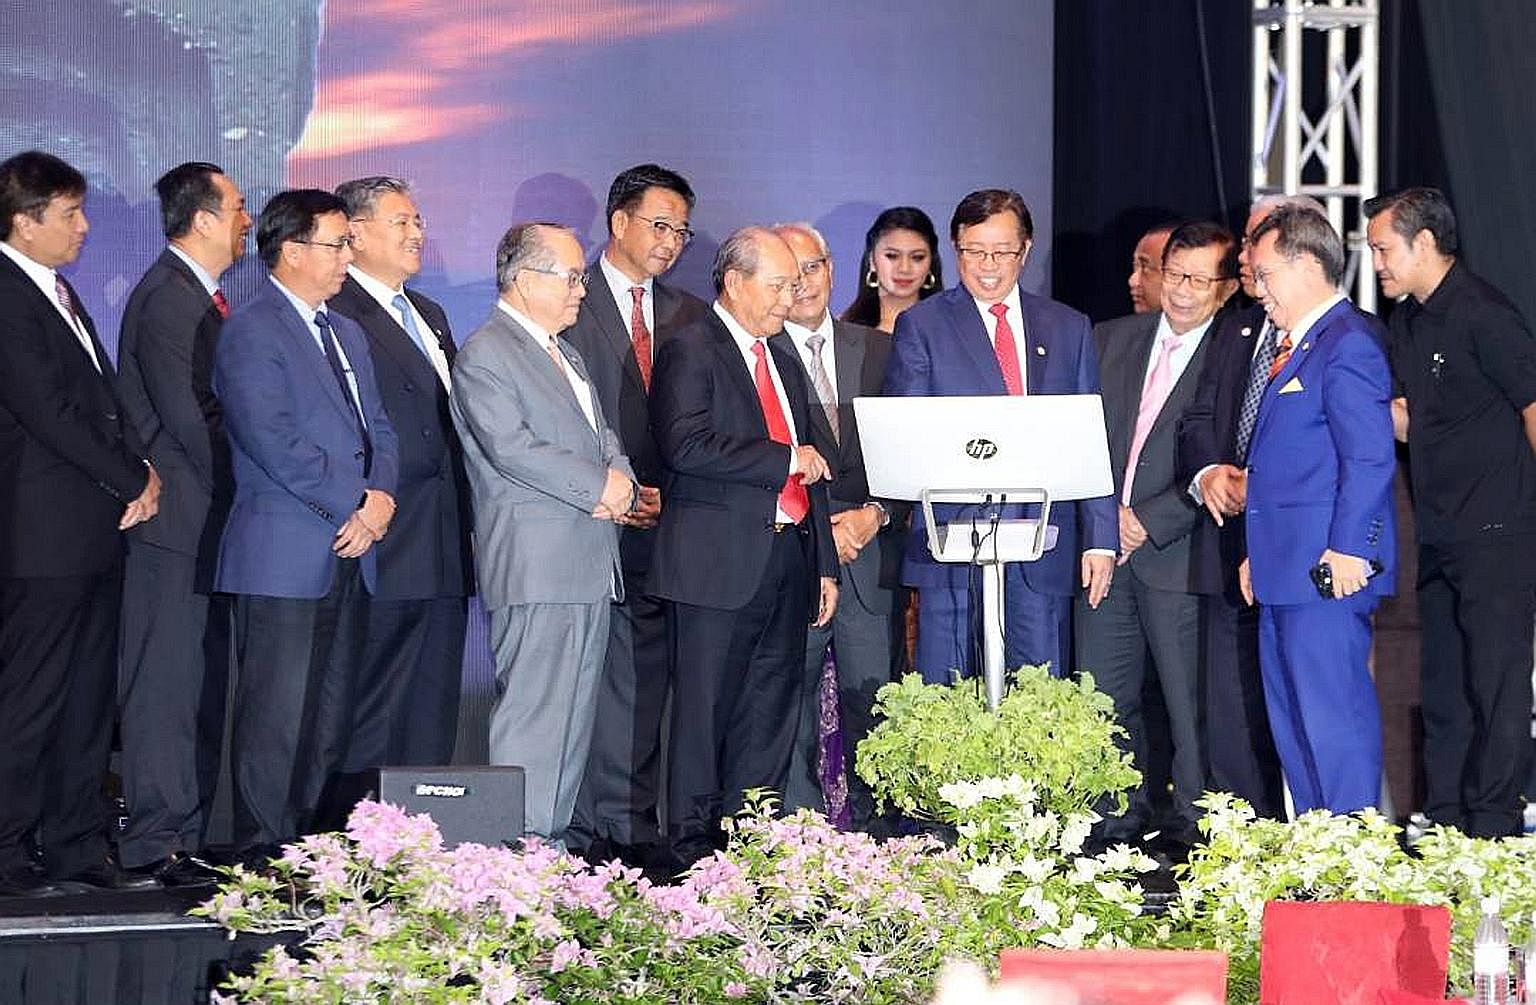 Sarawak Chief Minister Abang Johari Openg signing on a monitor to symbolically launch Petros. Also present were Deputy Chief Minister Douglas Uggah Embas (far left) and Petros chairman Hamid Bugo (third from left).